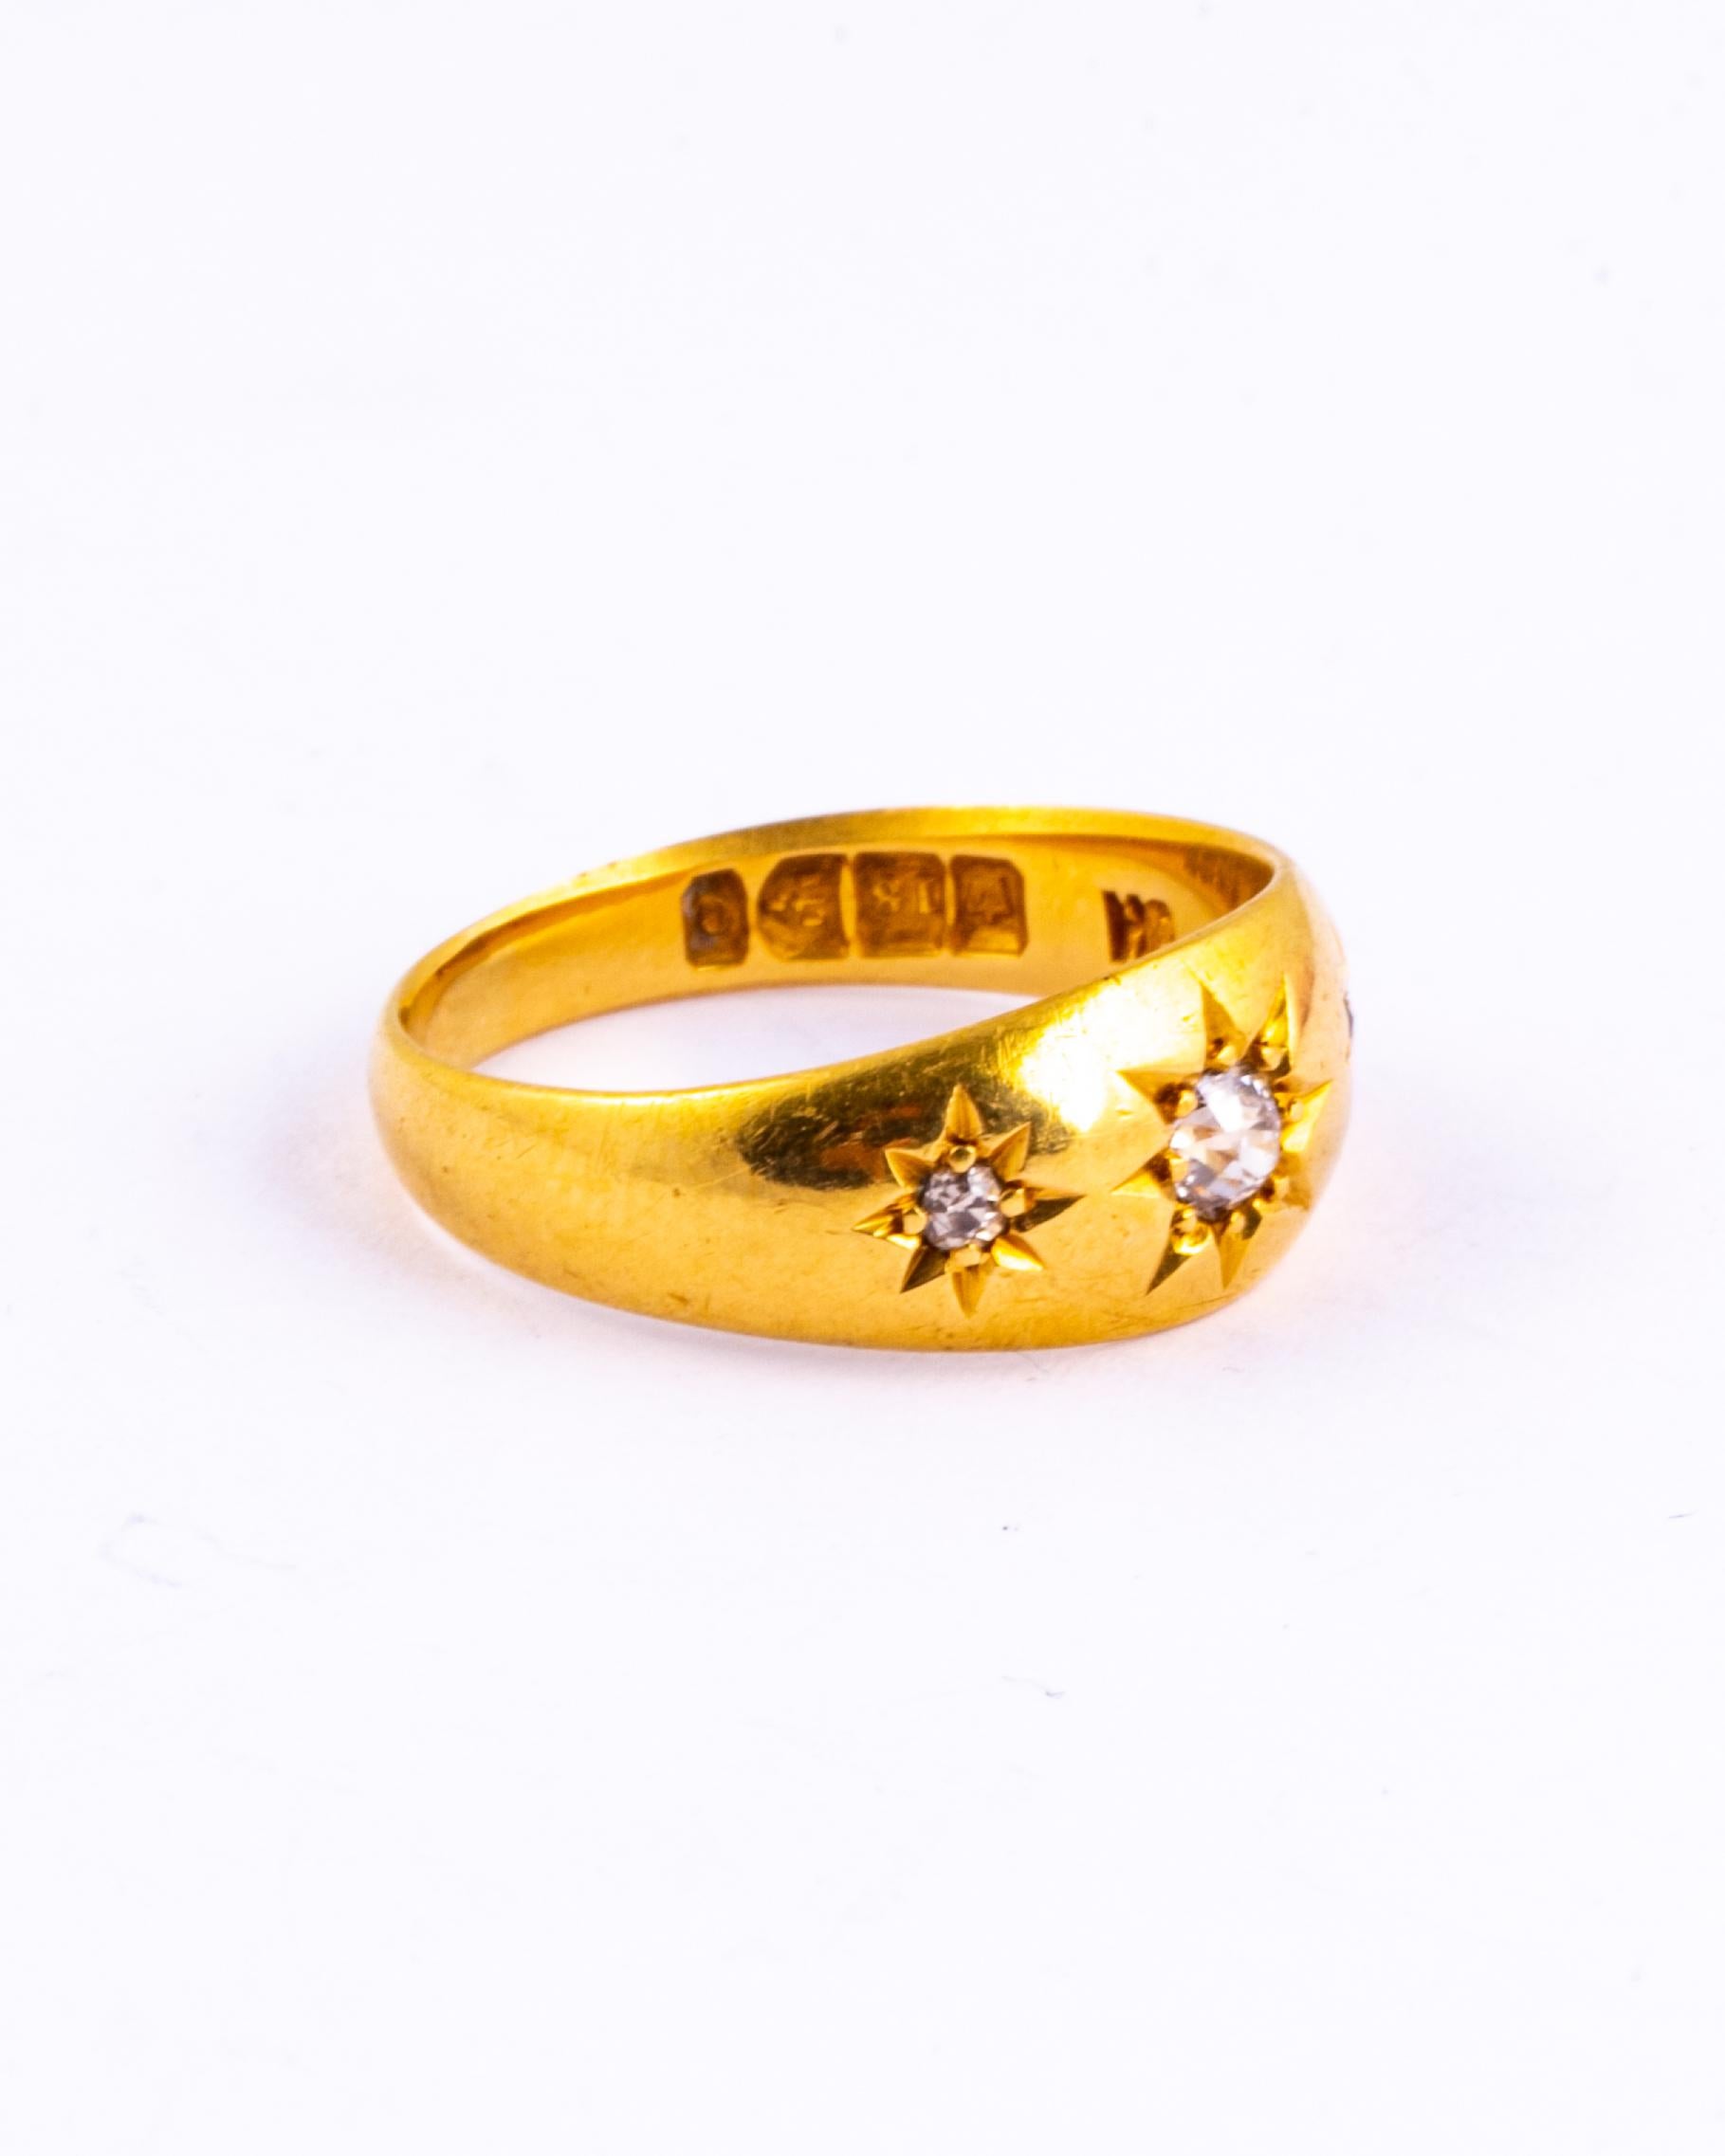 This gypsy ring holds three diamonds totalling approx 30pts and these are set in star settings. The glossy gold band is modelled in 18ct gold and made in Chester, England.

Ring Size: N or 6 3/4 
Band Width: 8mm

Weight: 4.58g